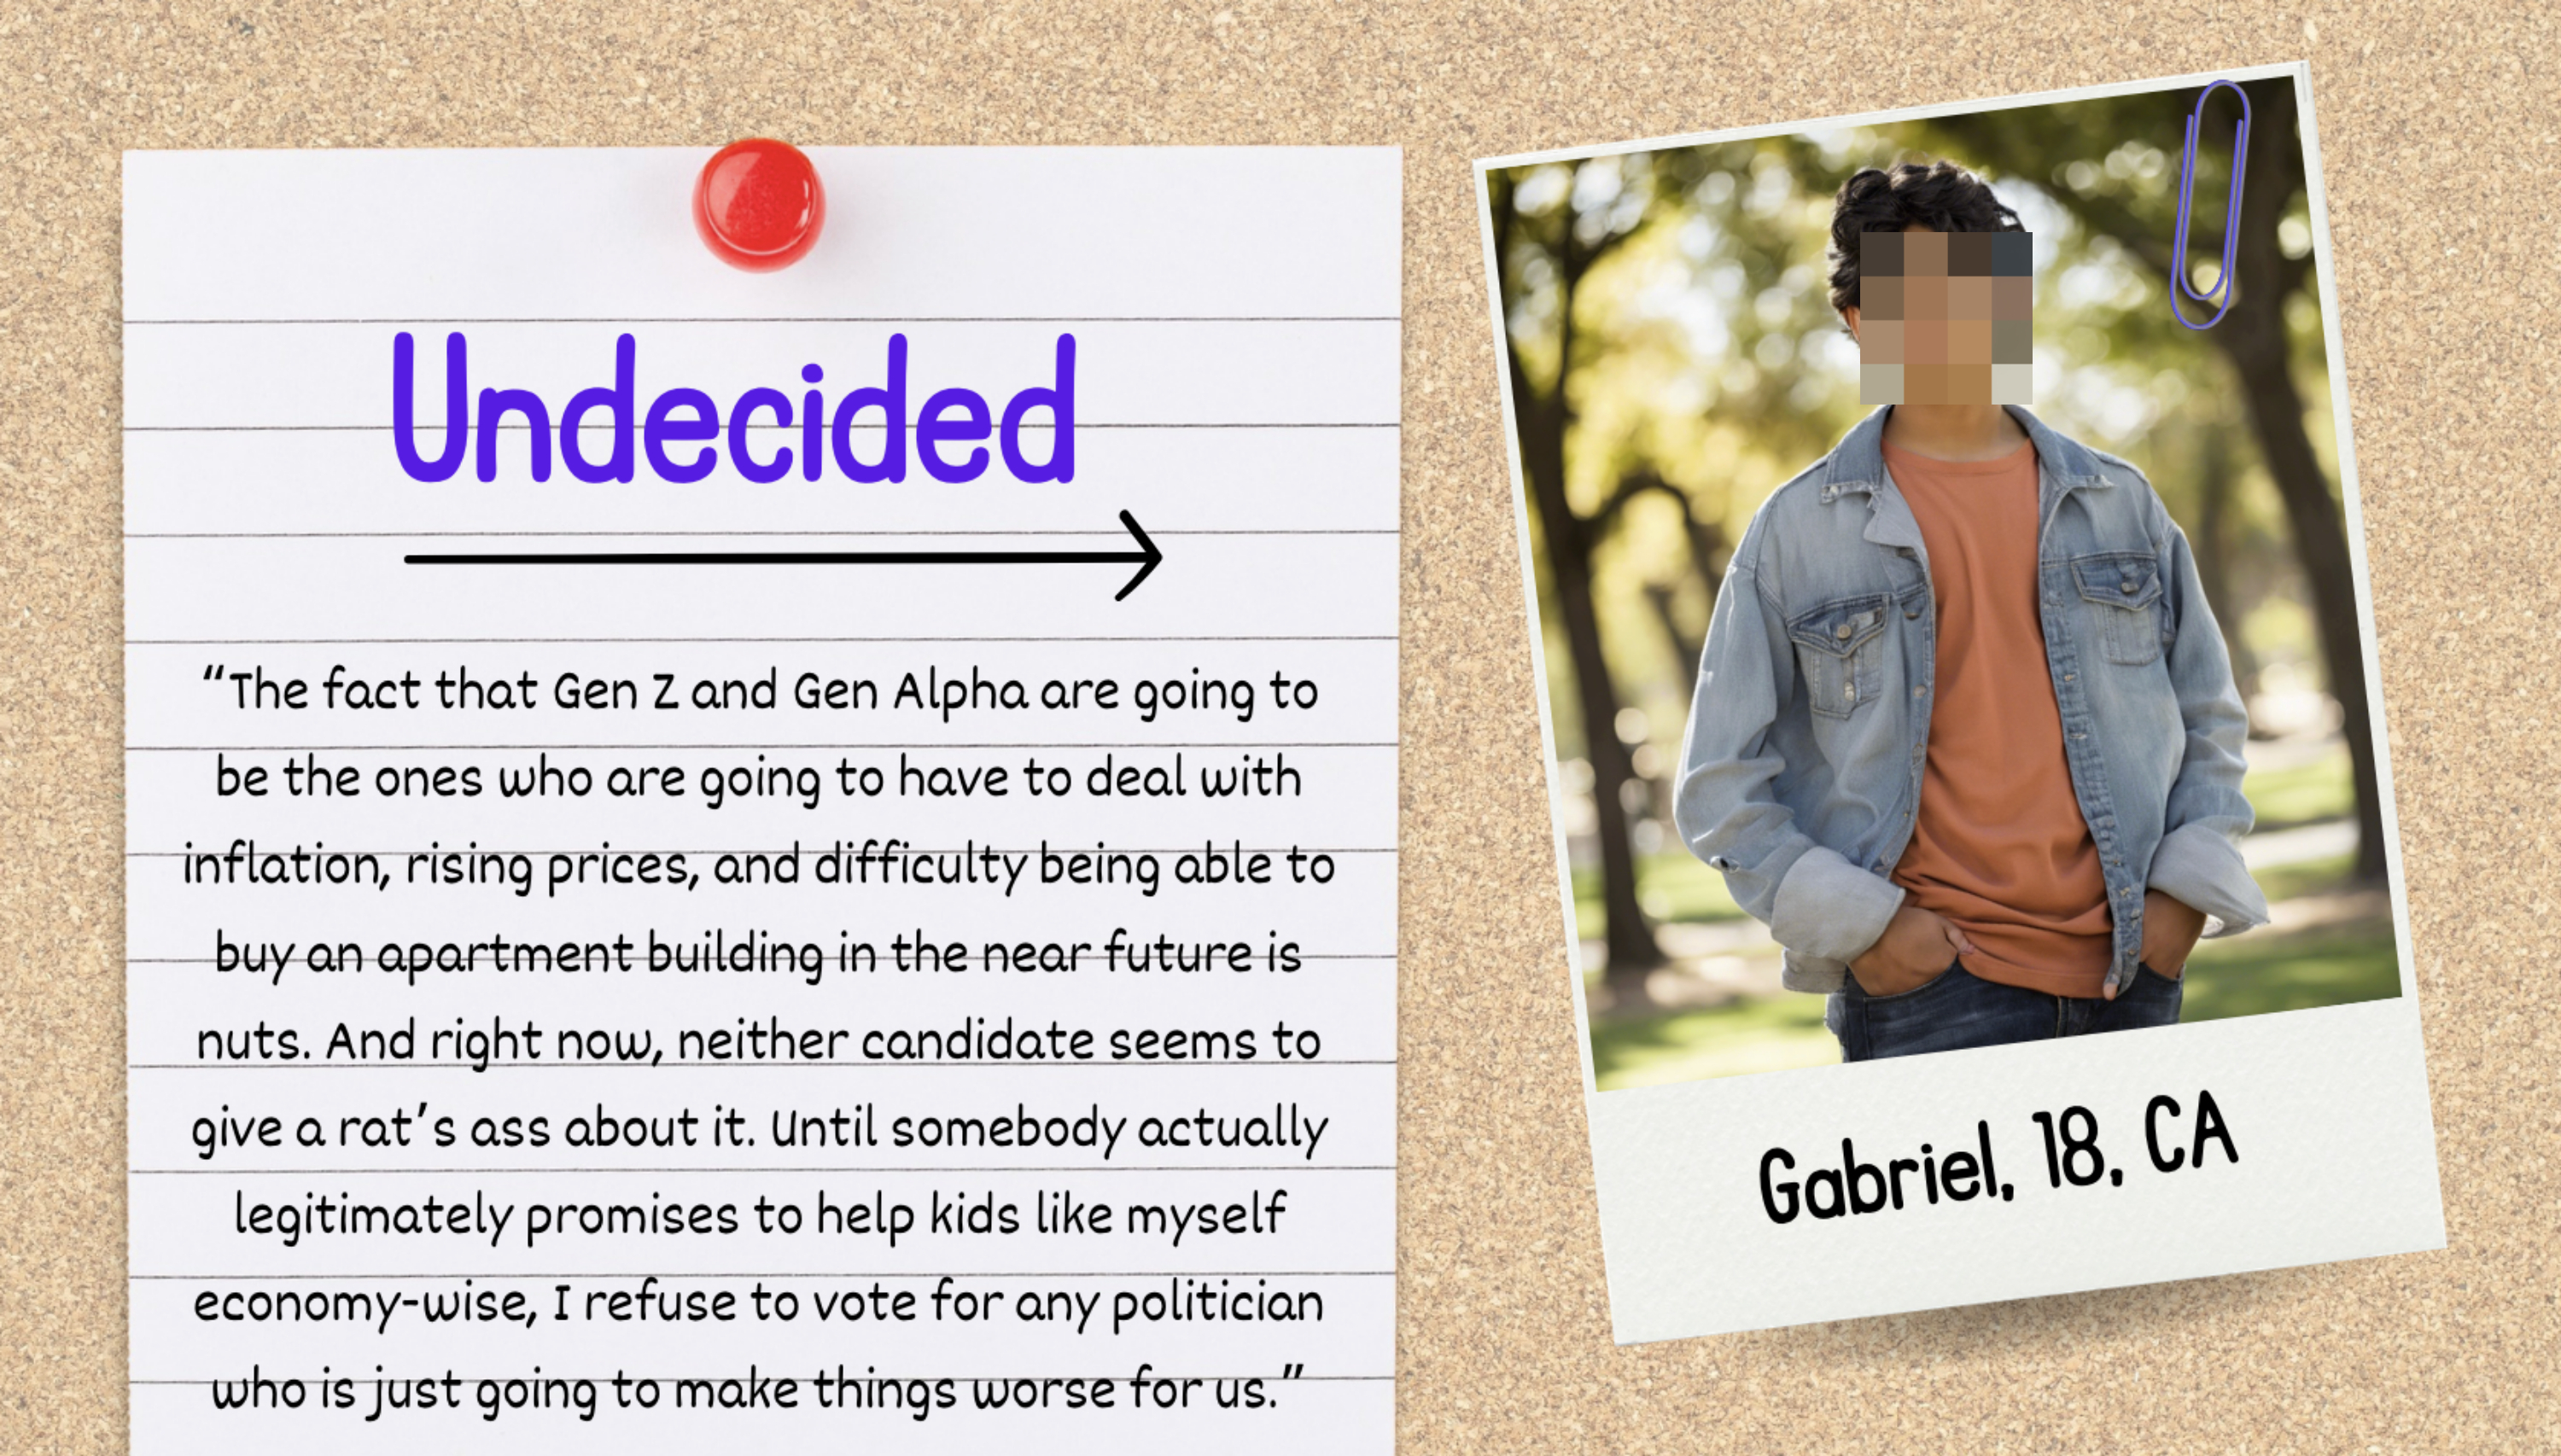 A bulletin board features a note saying &quot;Undecided&quot; with a quote about Gen Z and Gen Alpha&#x27;s future challenges